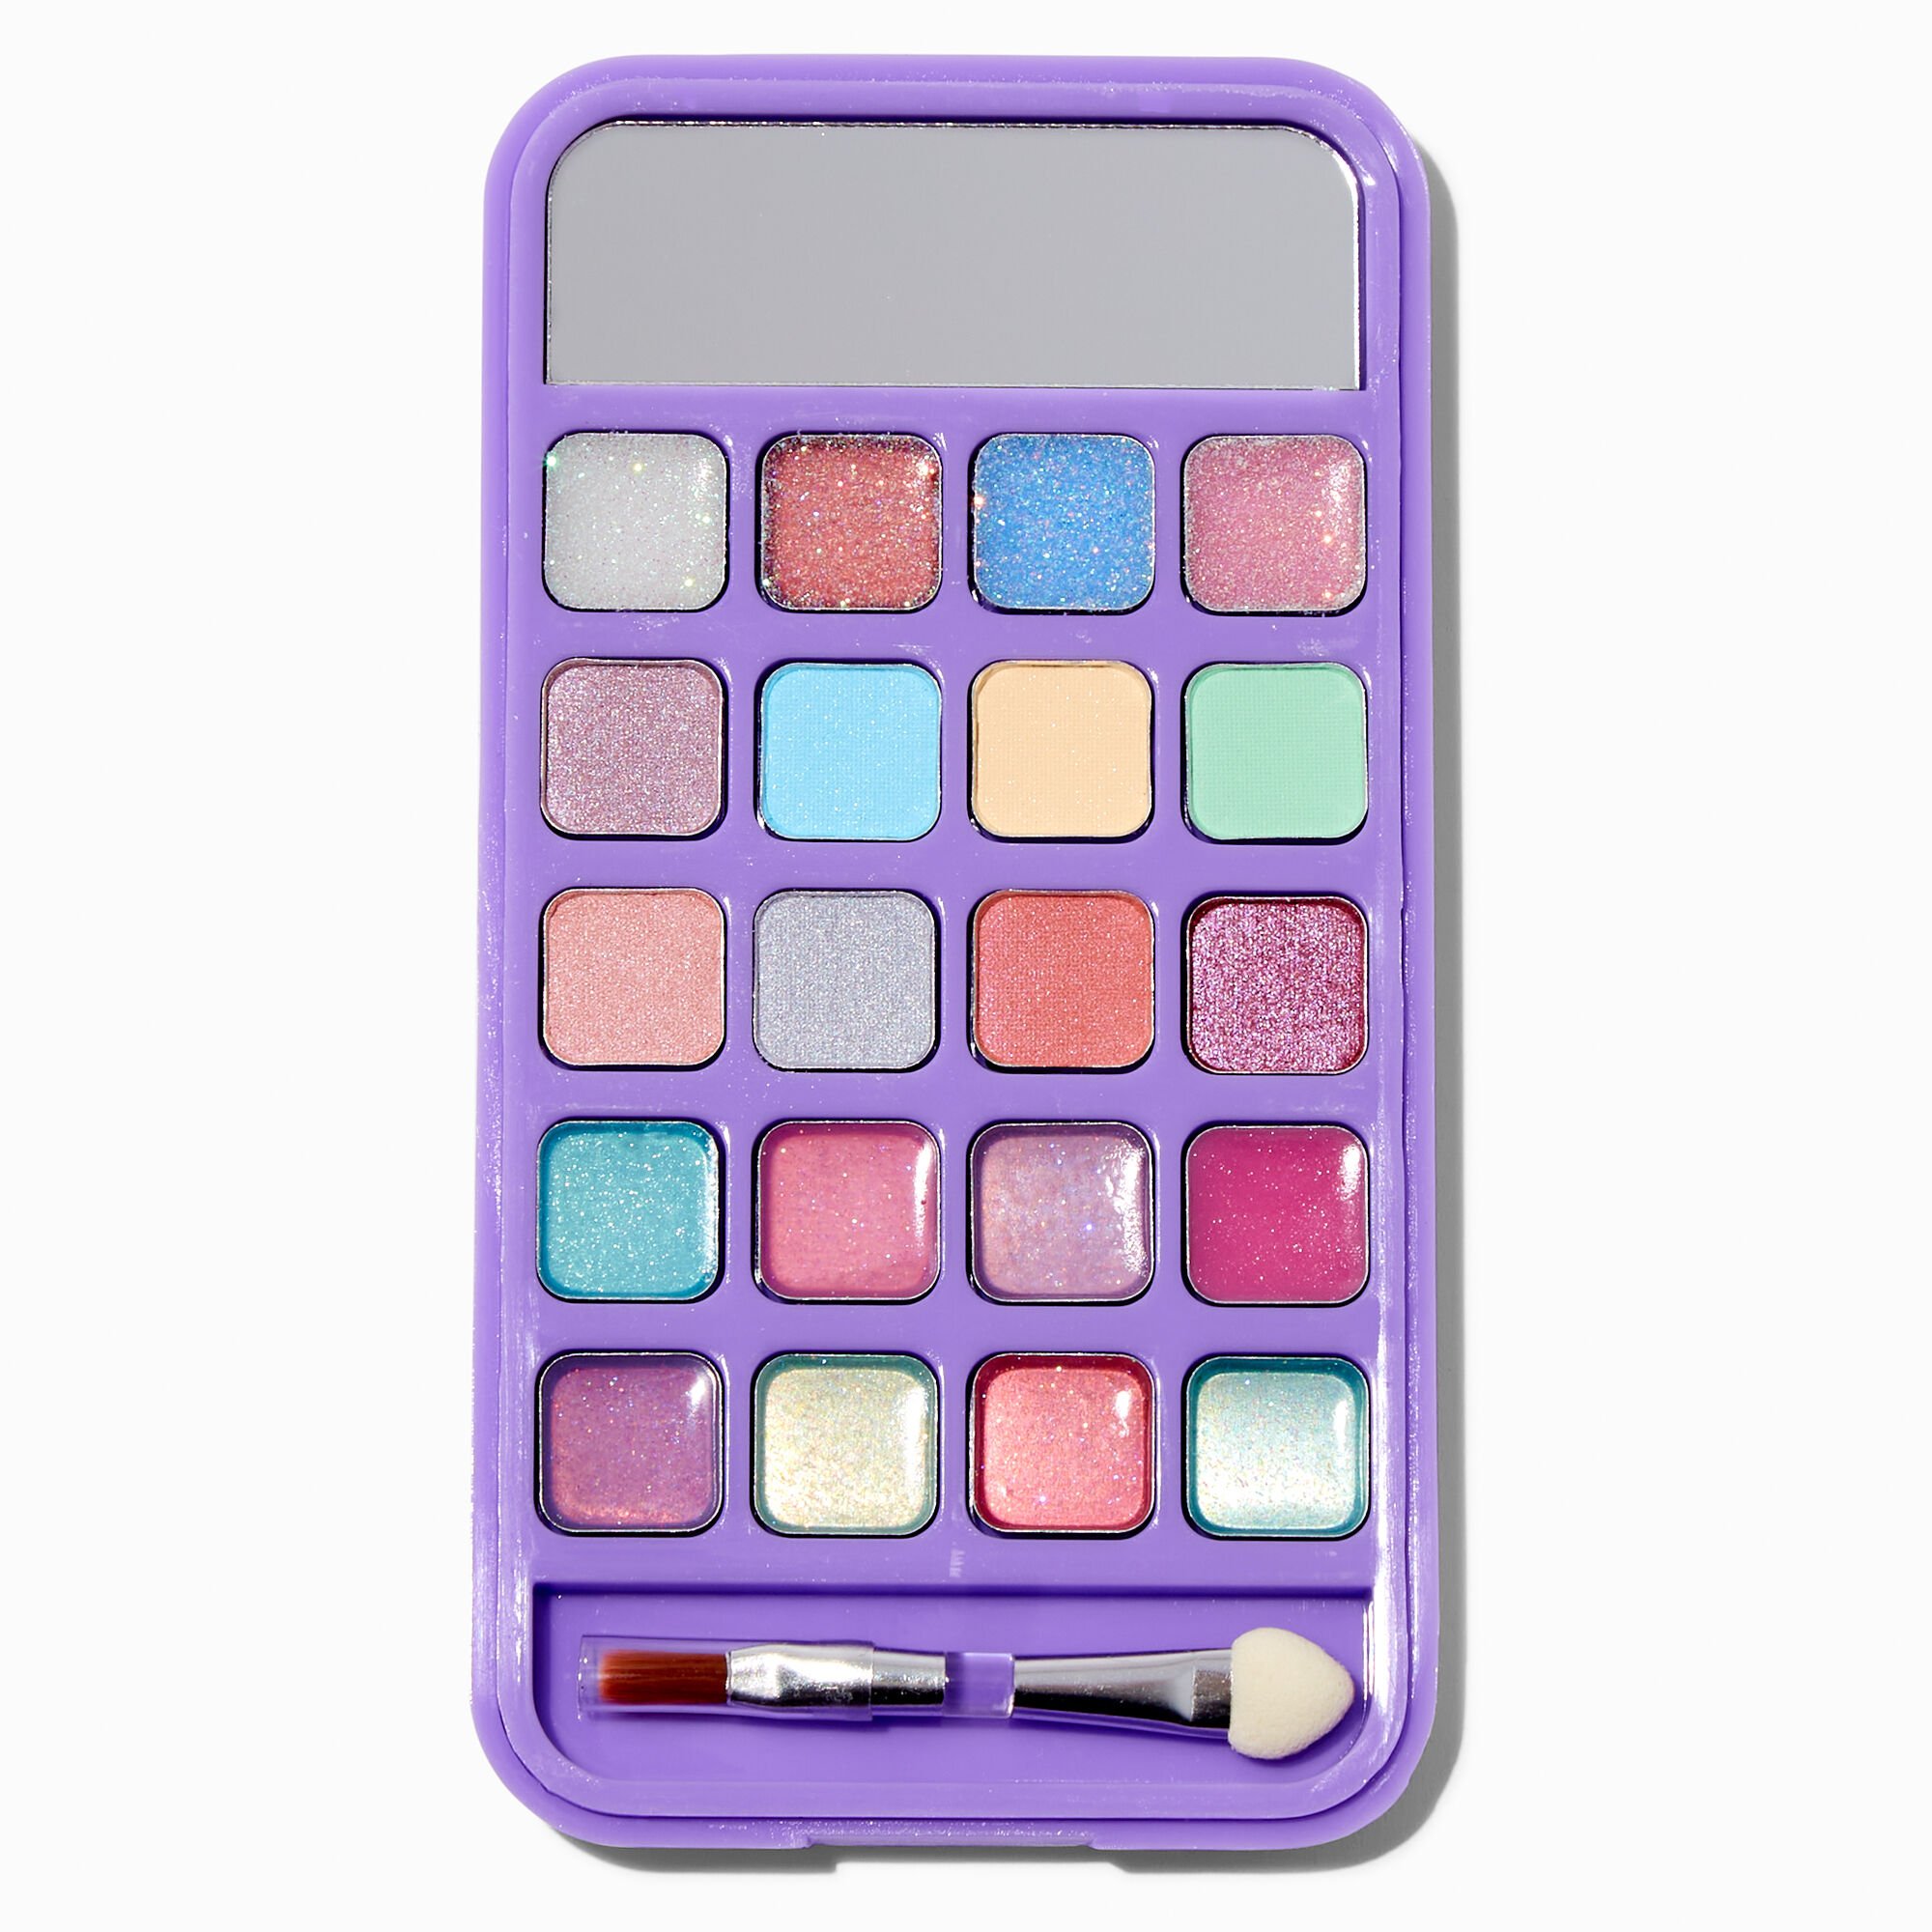 View Claires Puffy Candy Bling Cellphone Makeup Palette information